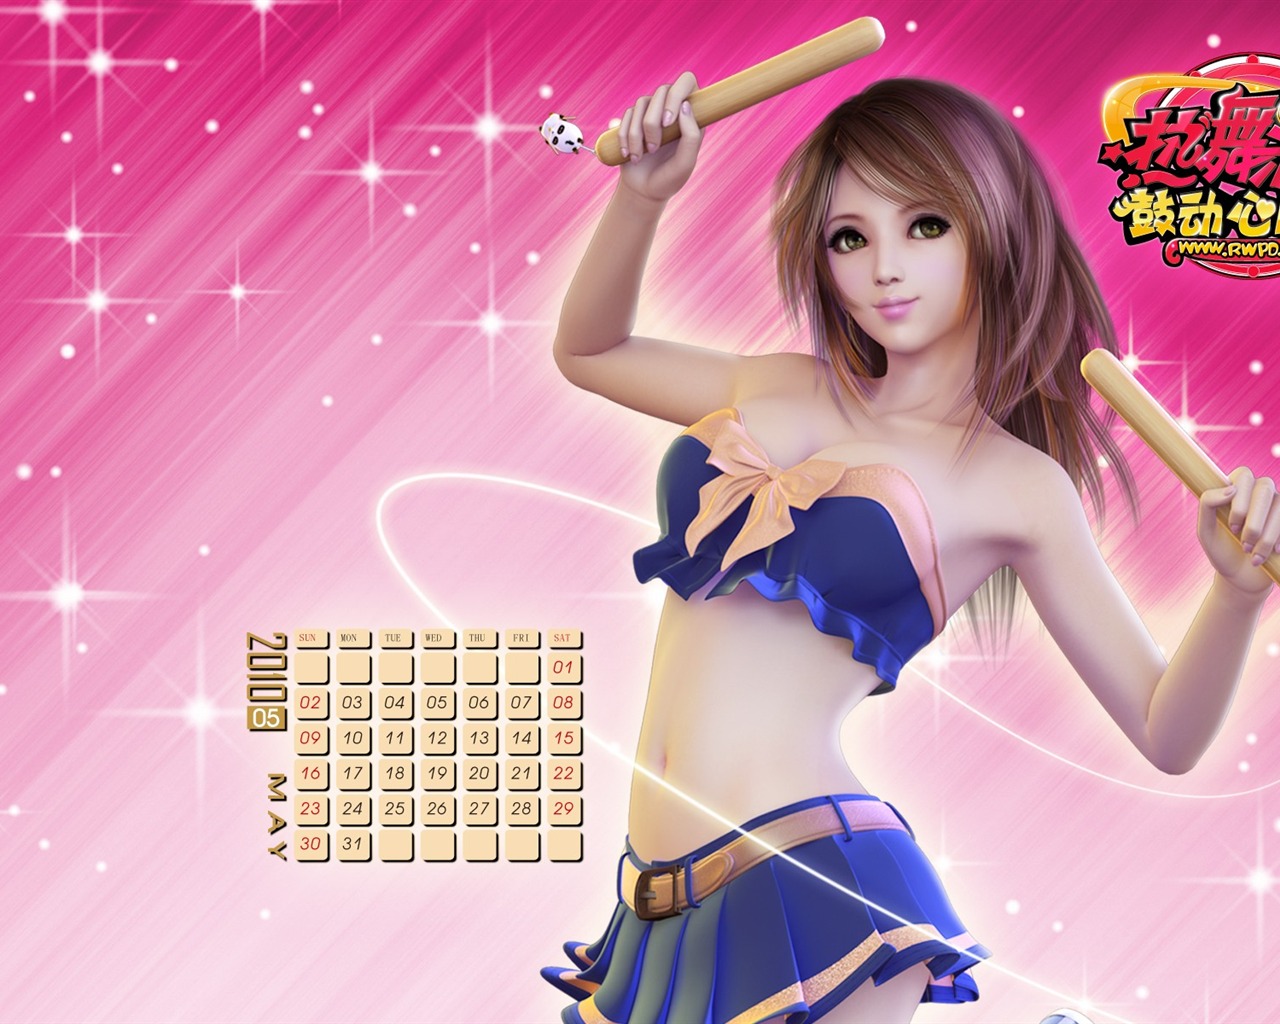 Online game Hot Dance Party II official wallpapers #24 - 1280x1024